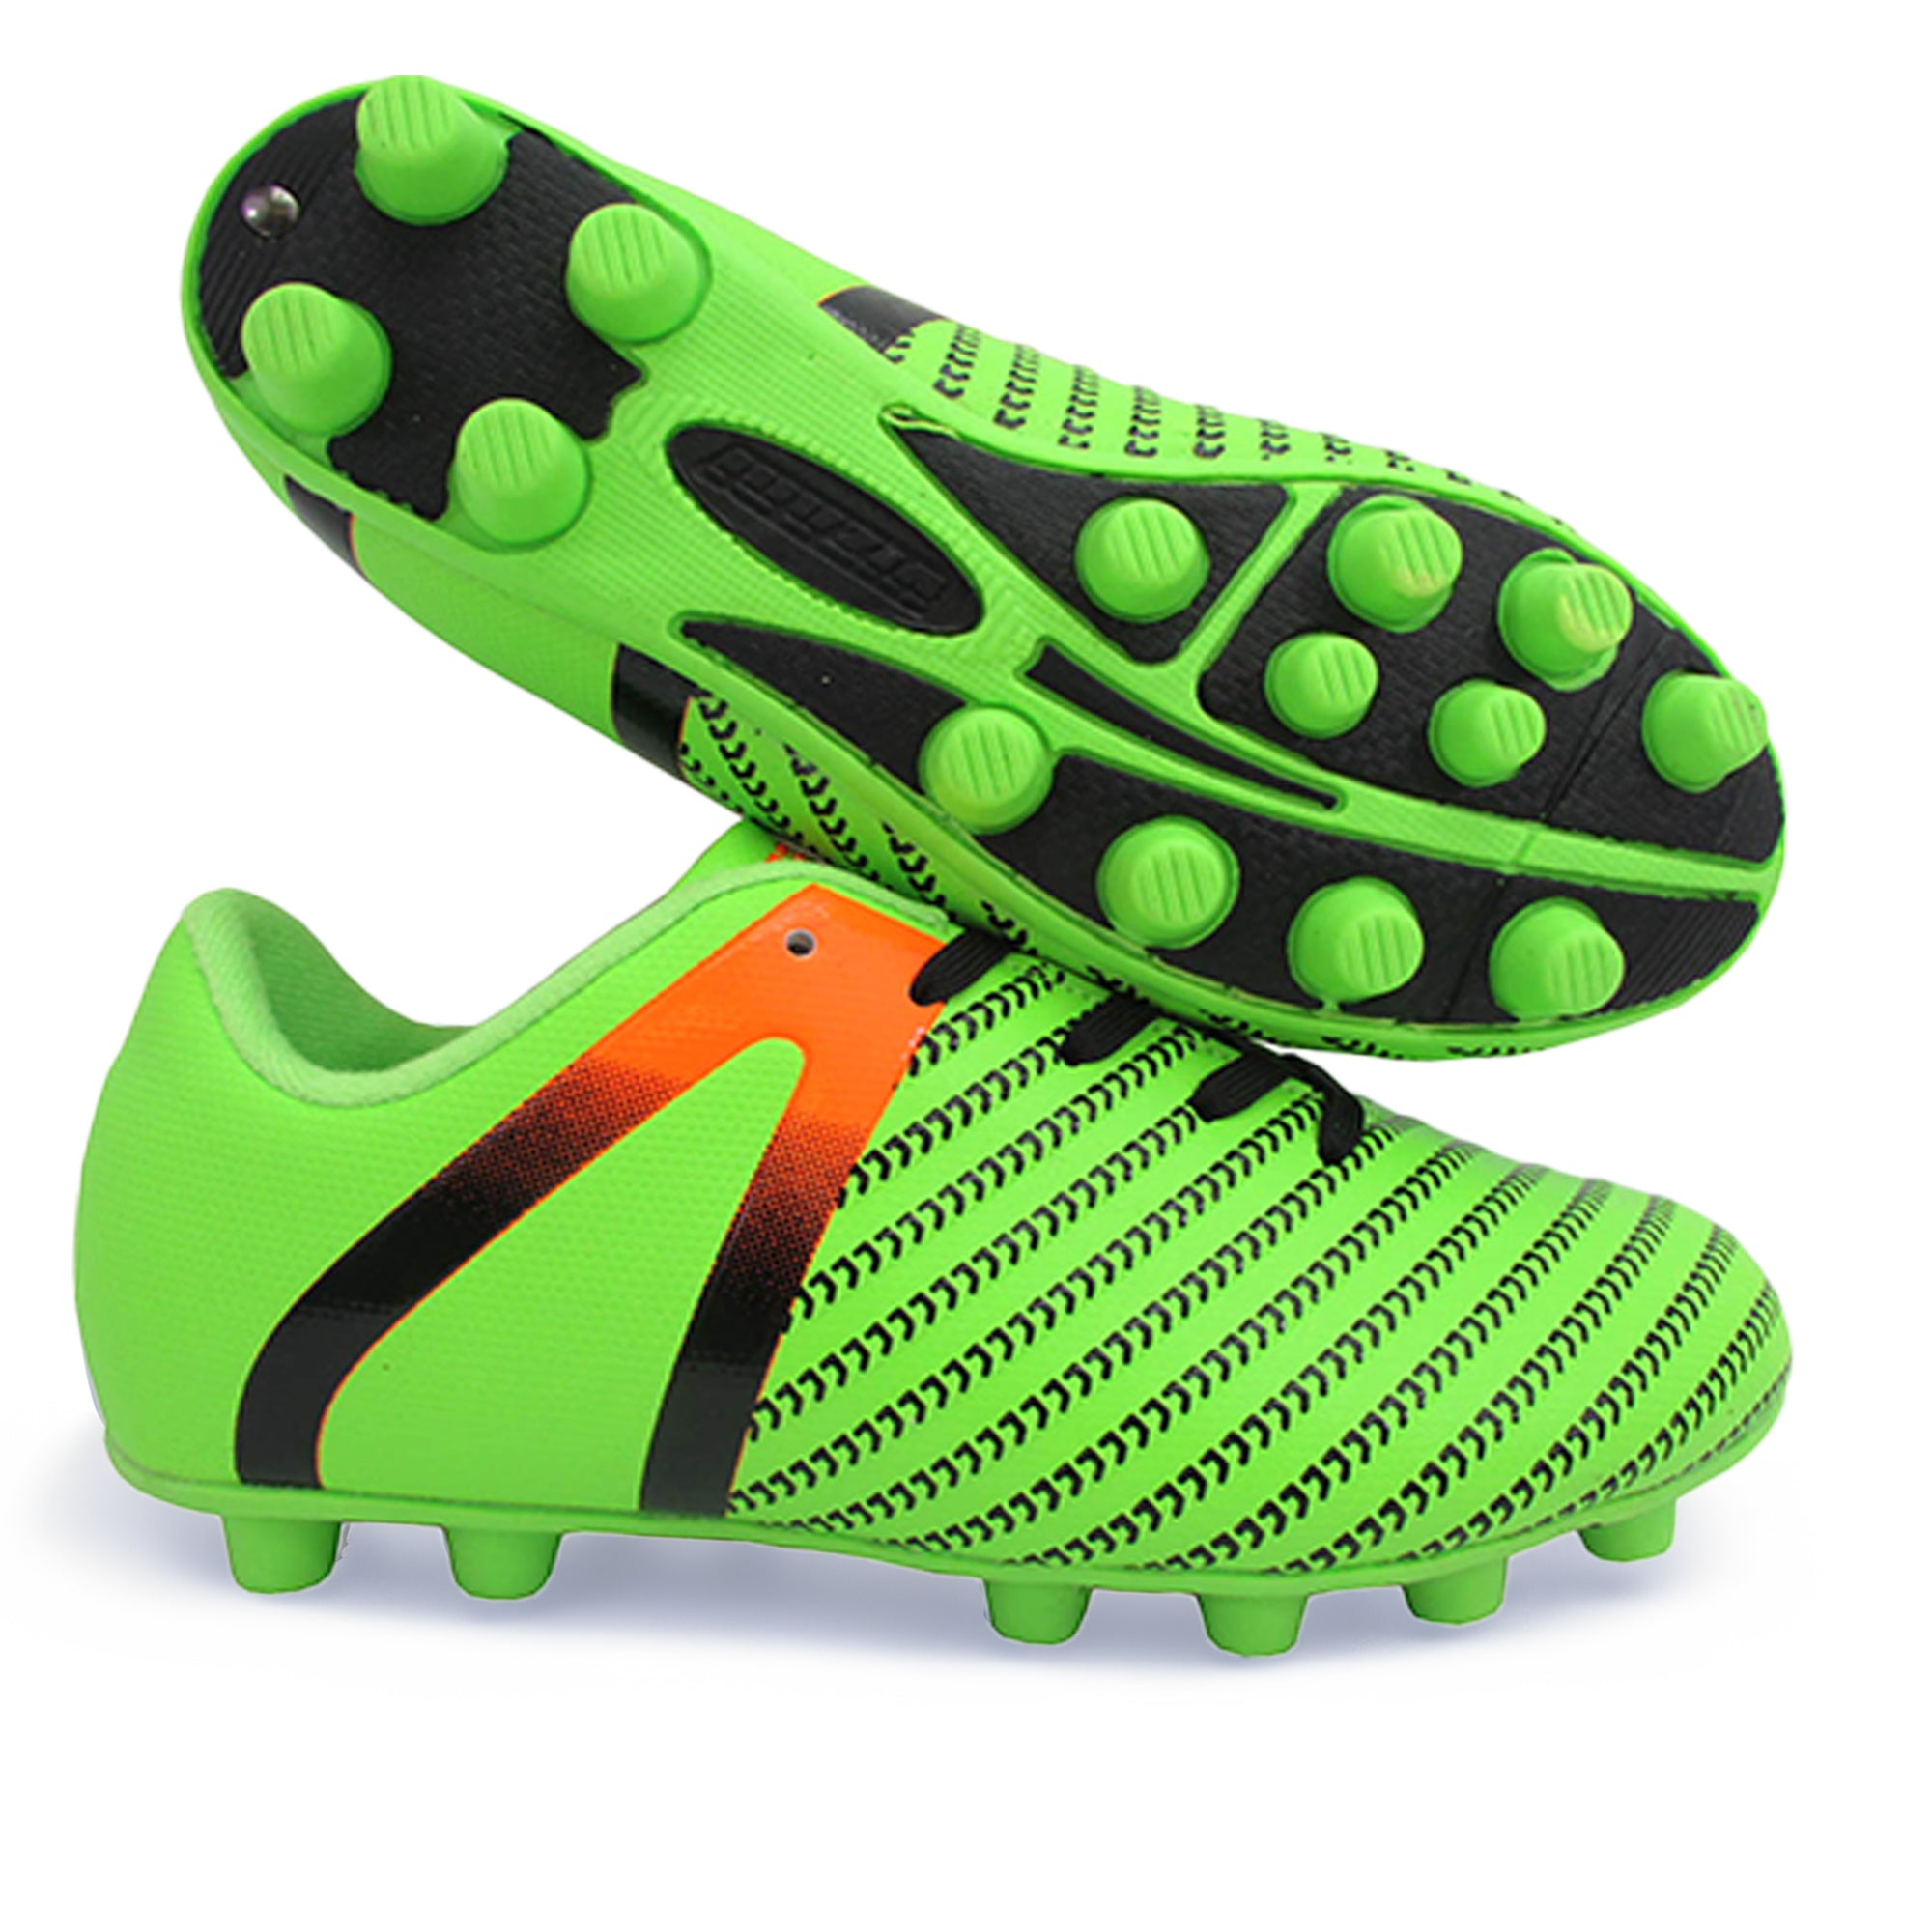 Impact Firm Ground Soccer Shoes -Green/Orange